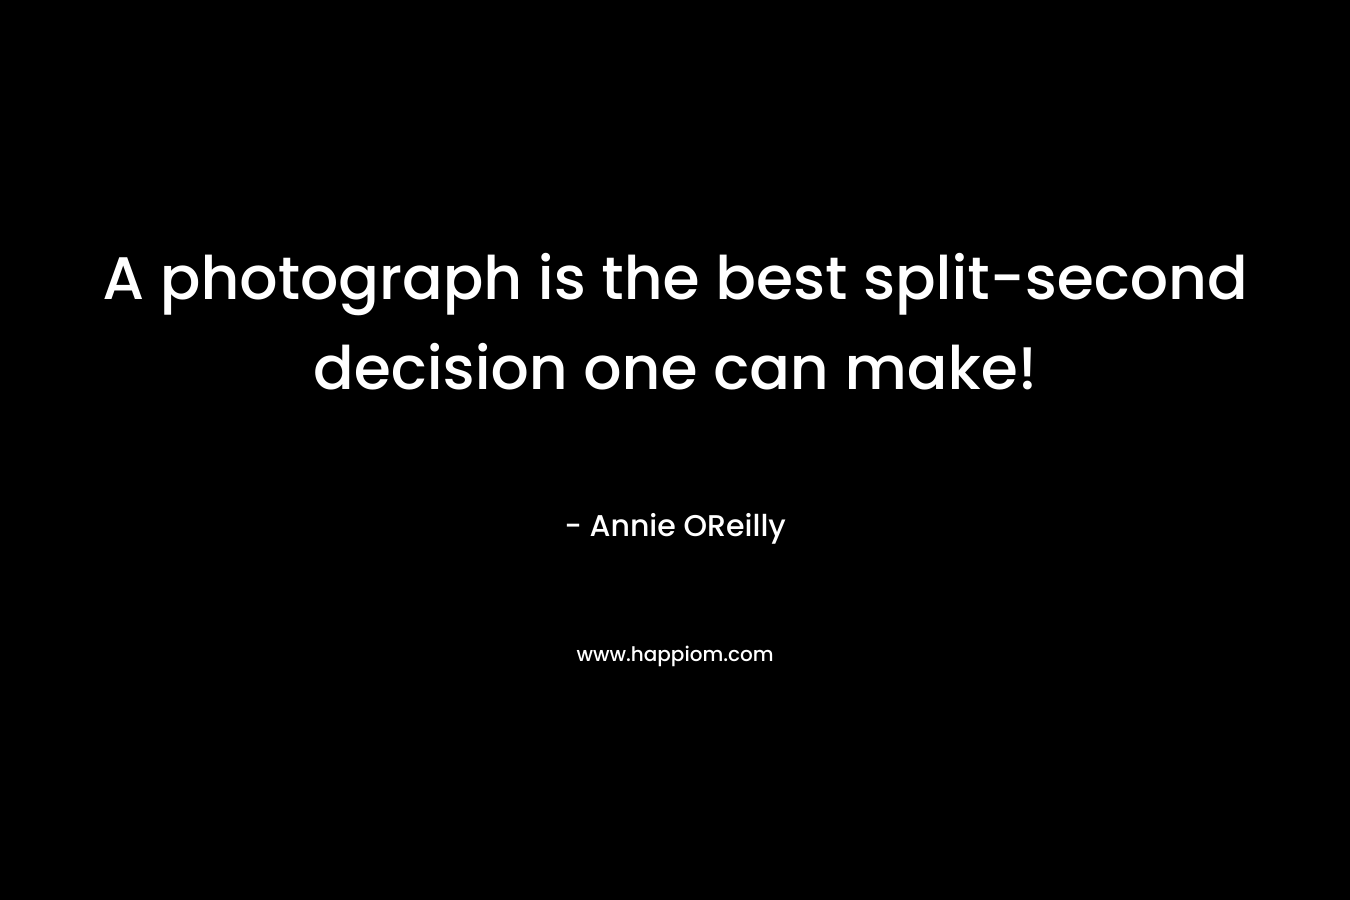 A photograph is the best split-second decision one can make!